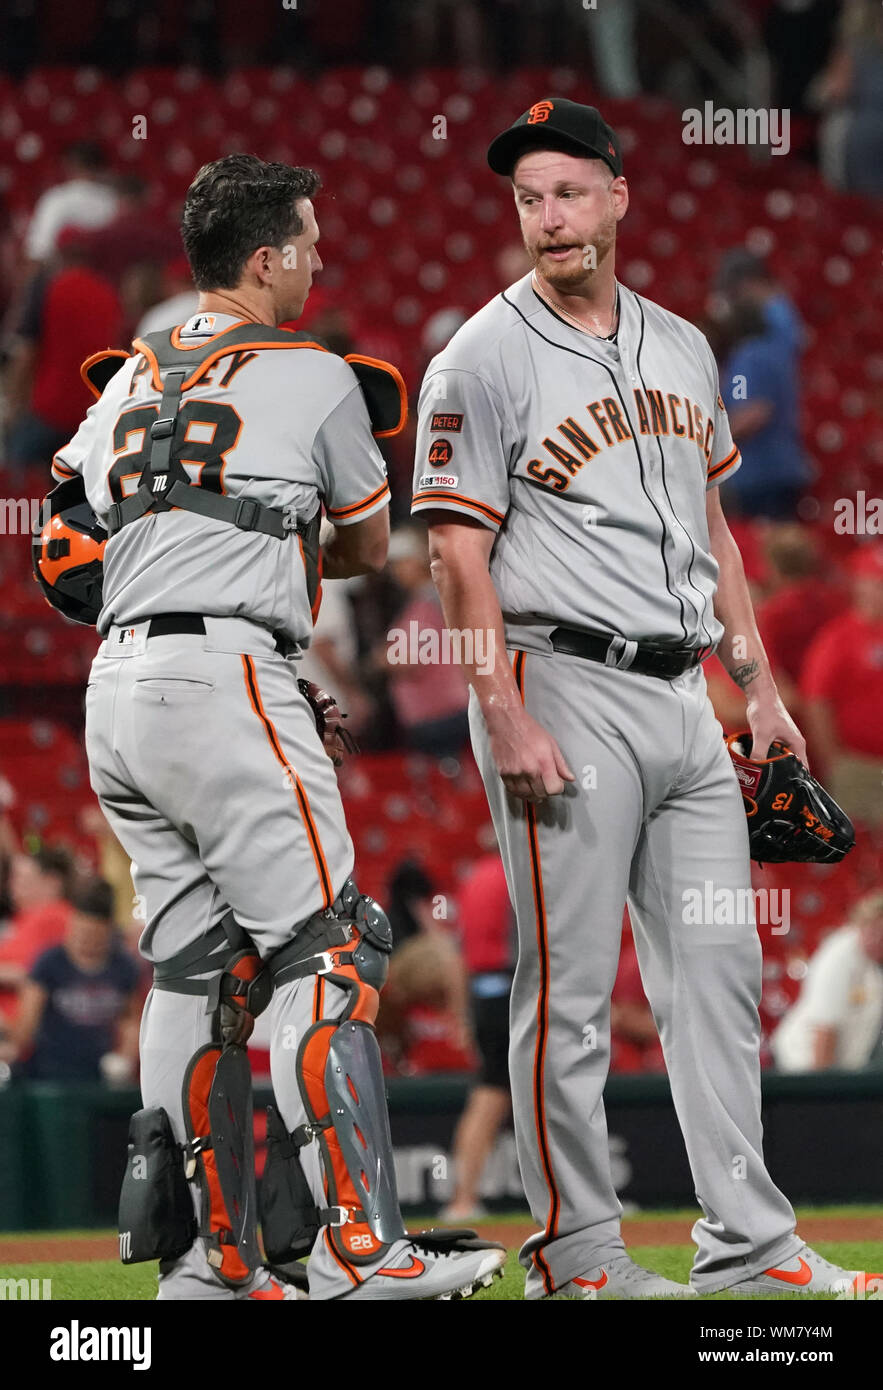 St. Louis, United States. 05th Sep, 2019. San Francisco Giants catcher Buster Posey talks with pitcher Will Smith after the third out and a 9-8 win over the St. Louis Cardinals at Busch Stadium in St. Louis on Wednesday, September 4, 2019. Photo by Bill Greenblatt/UPI Credit: UPI/Alamy Live News Stock Photo